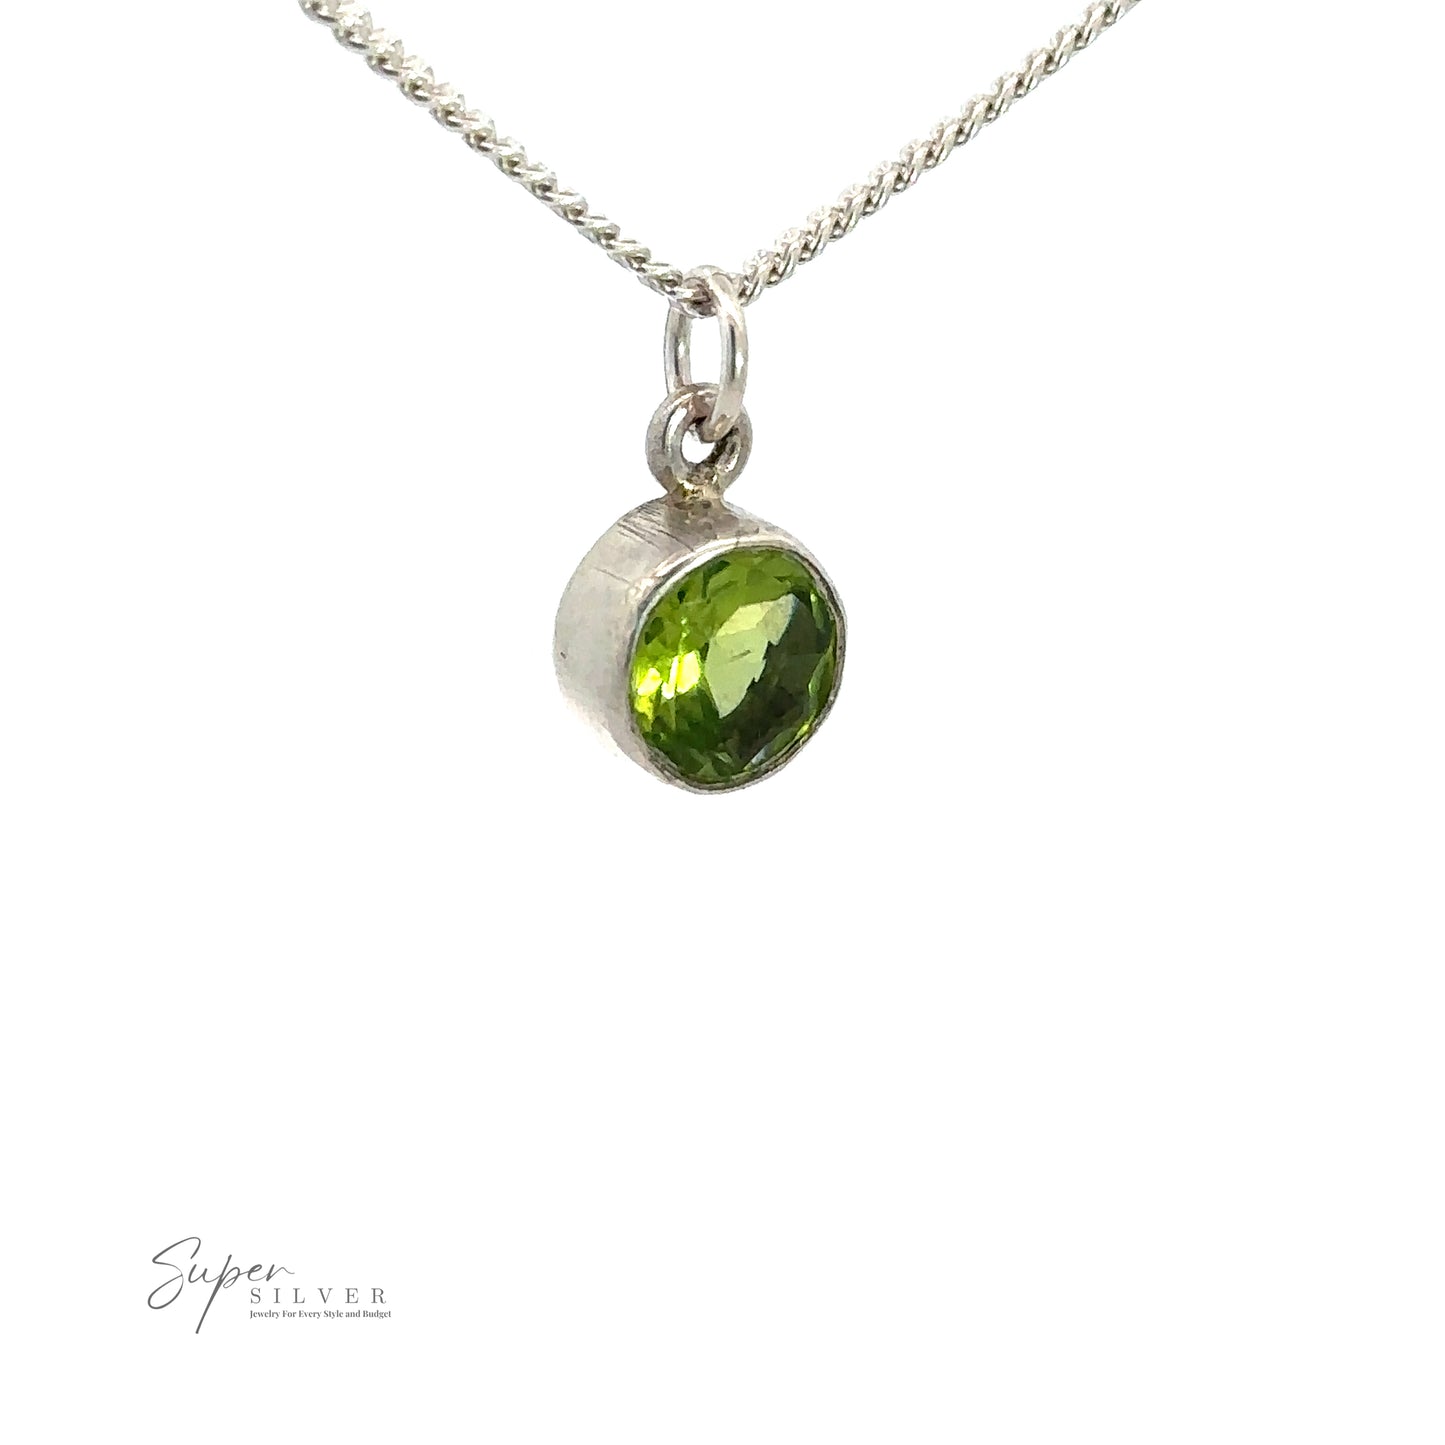 
                  
                    A silver necklace with a Round Peridot Pendant, the birthstone for August, photographed against a white background with the logo "Super Silver" in the bottom left corner.
                  
                